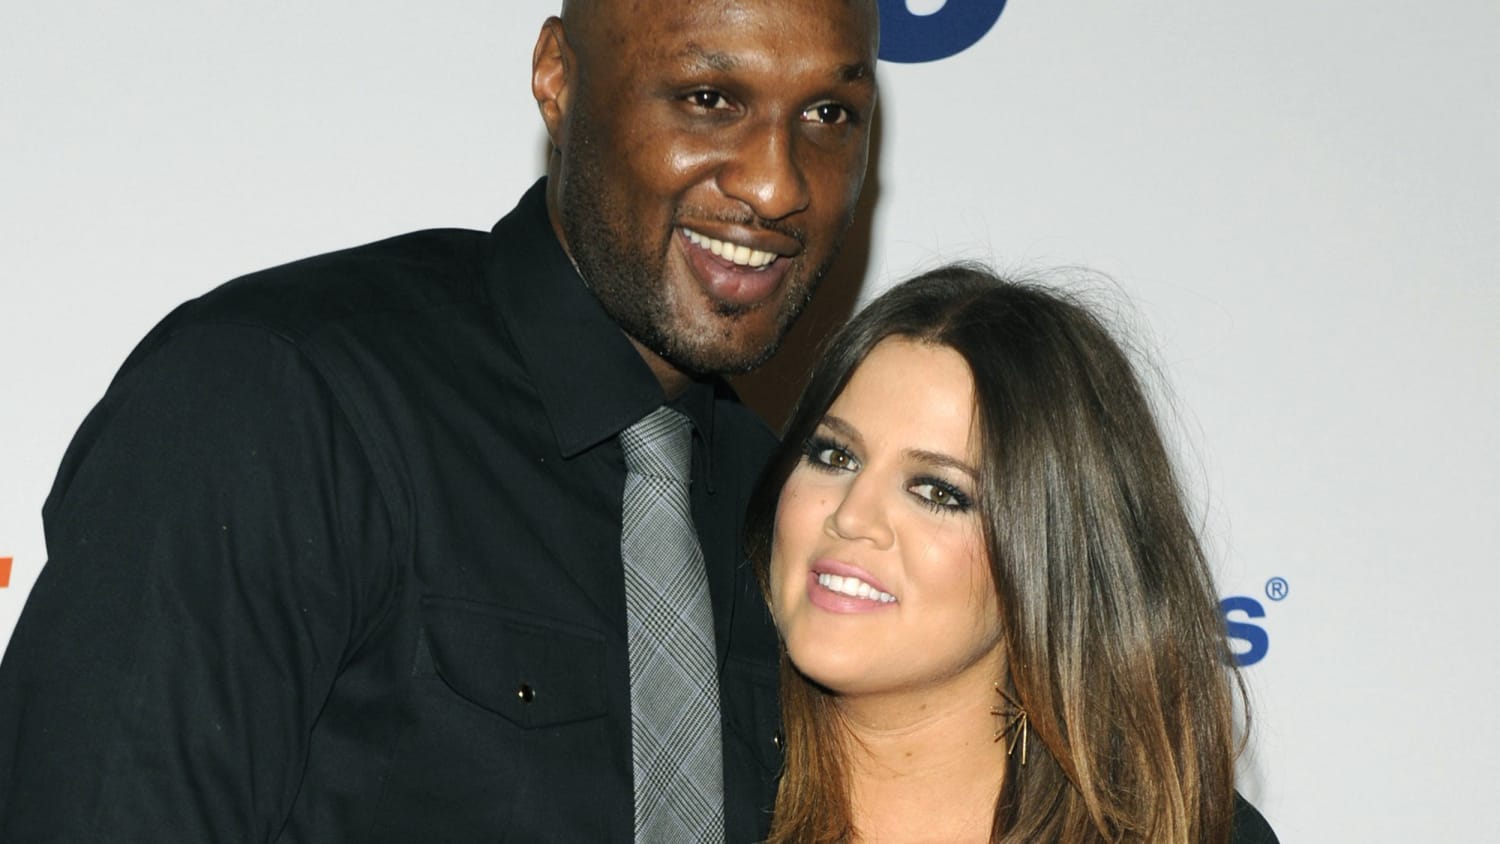 Khloe Kardashian And Lamar Odom Are Reportedly Calling Off